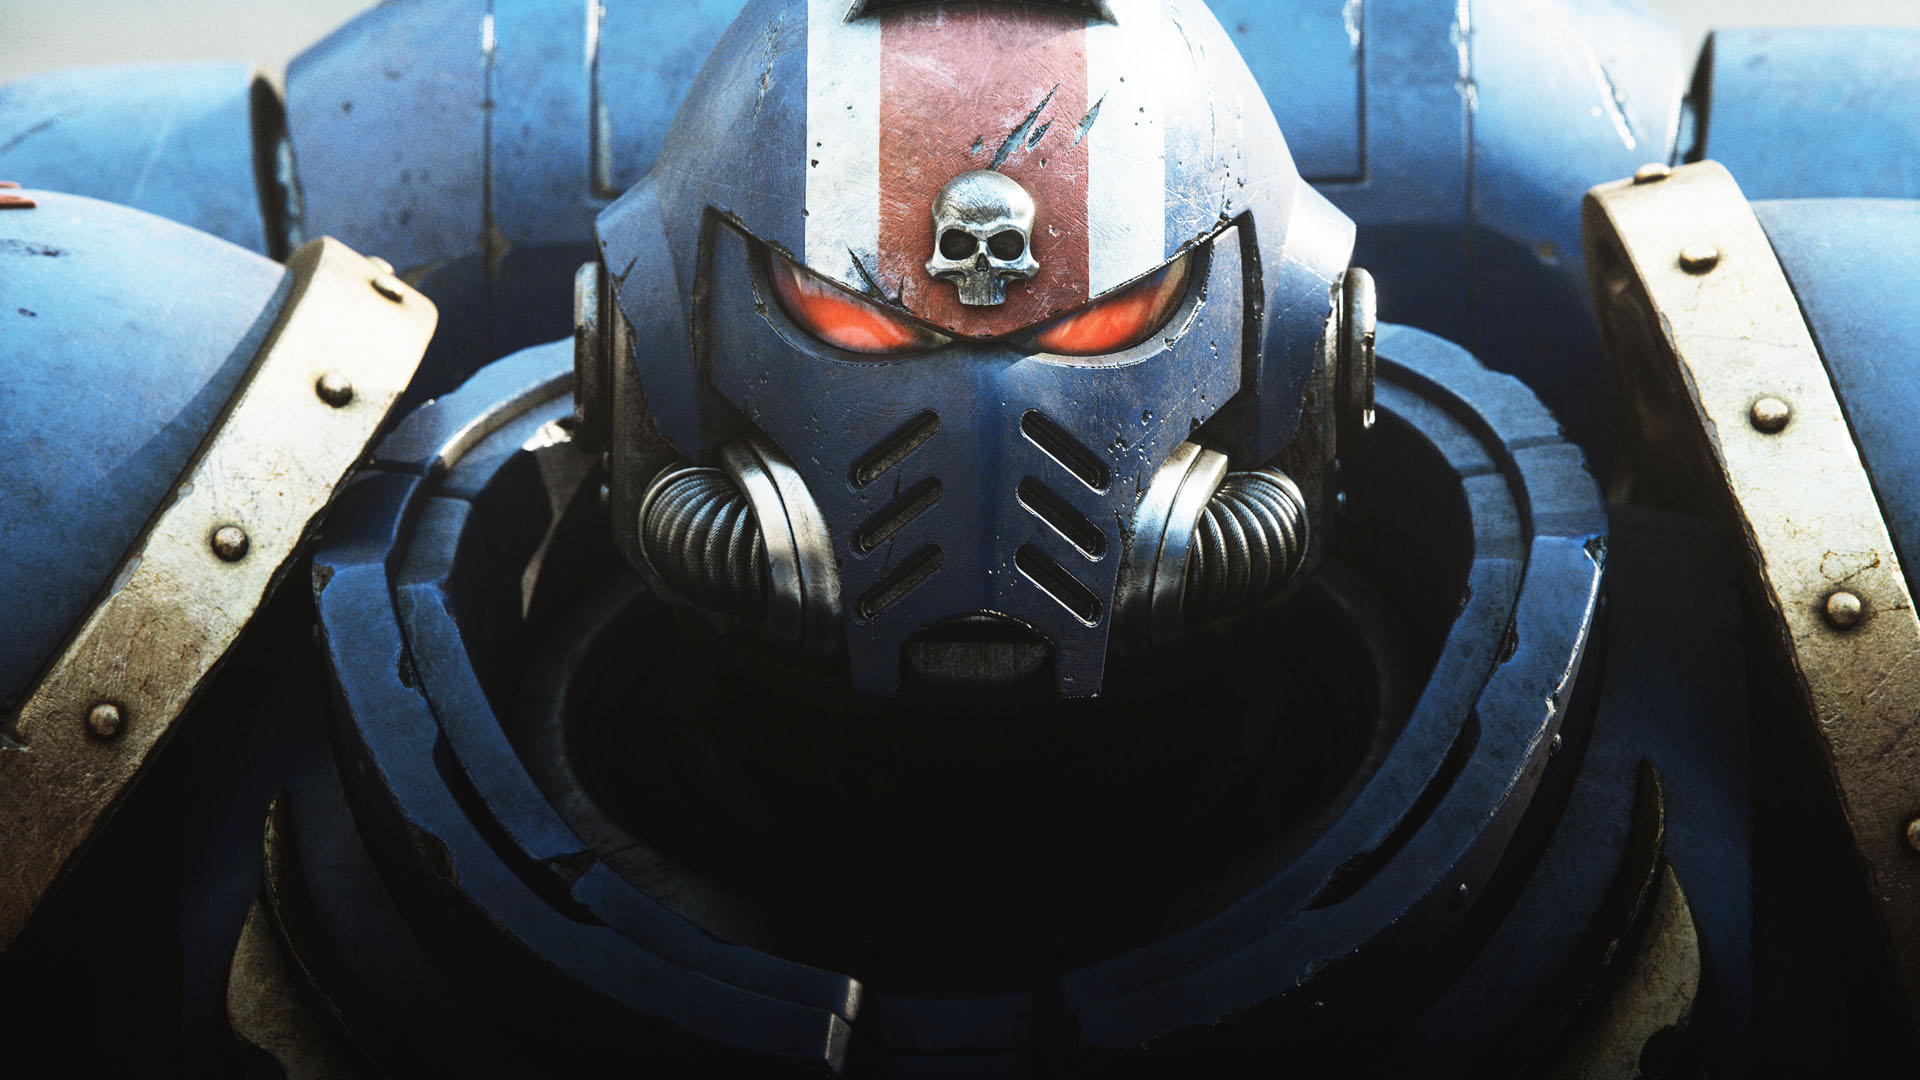 Warhammer 40k Space Marine 2 has been delayed by up to a year